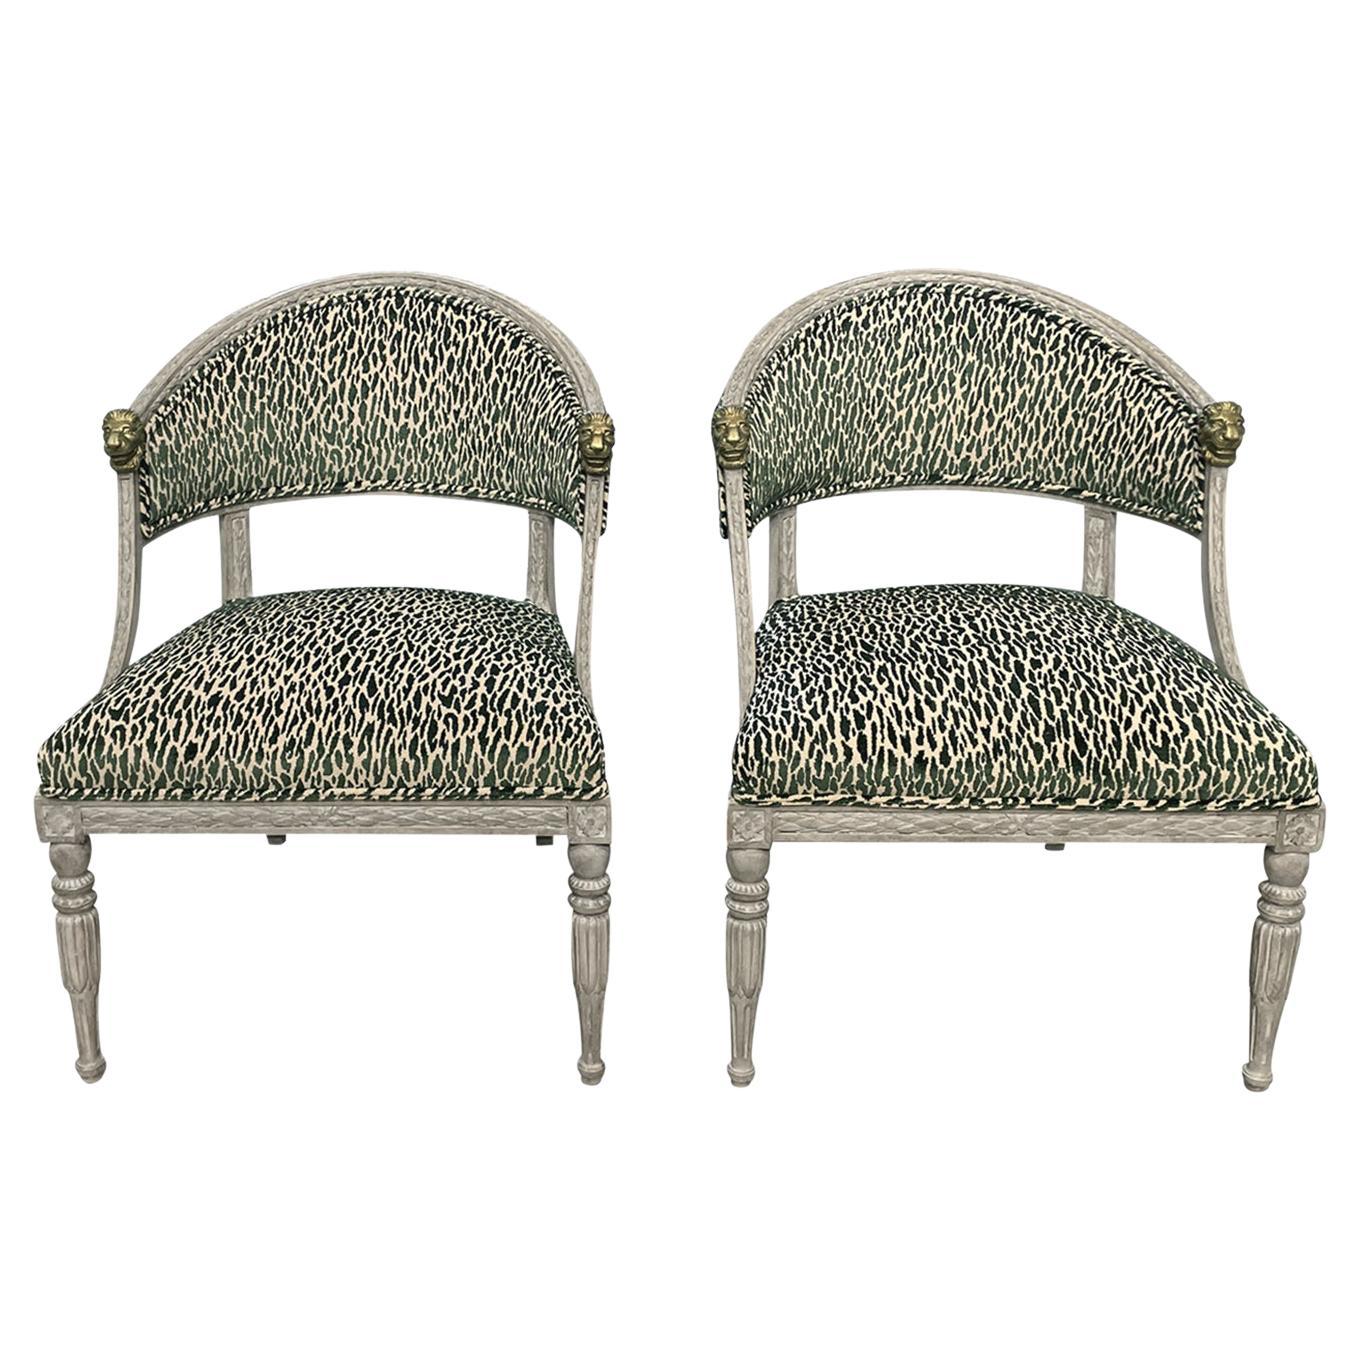 Pair of 19th Century Swedish Gustavian Side Chairs Attributed to Ephraim Ståhl